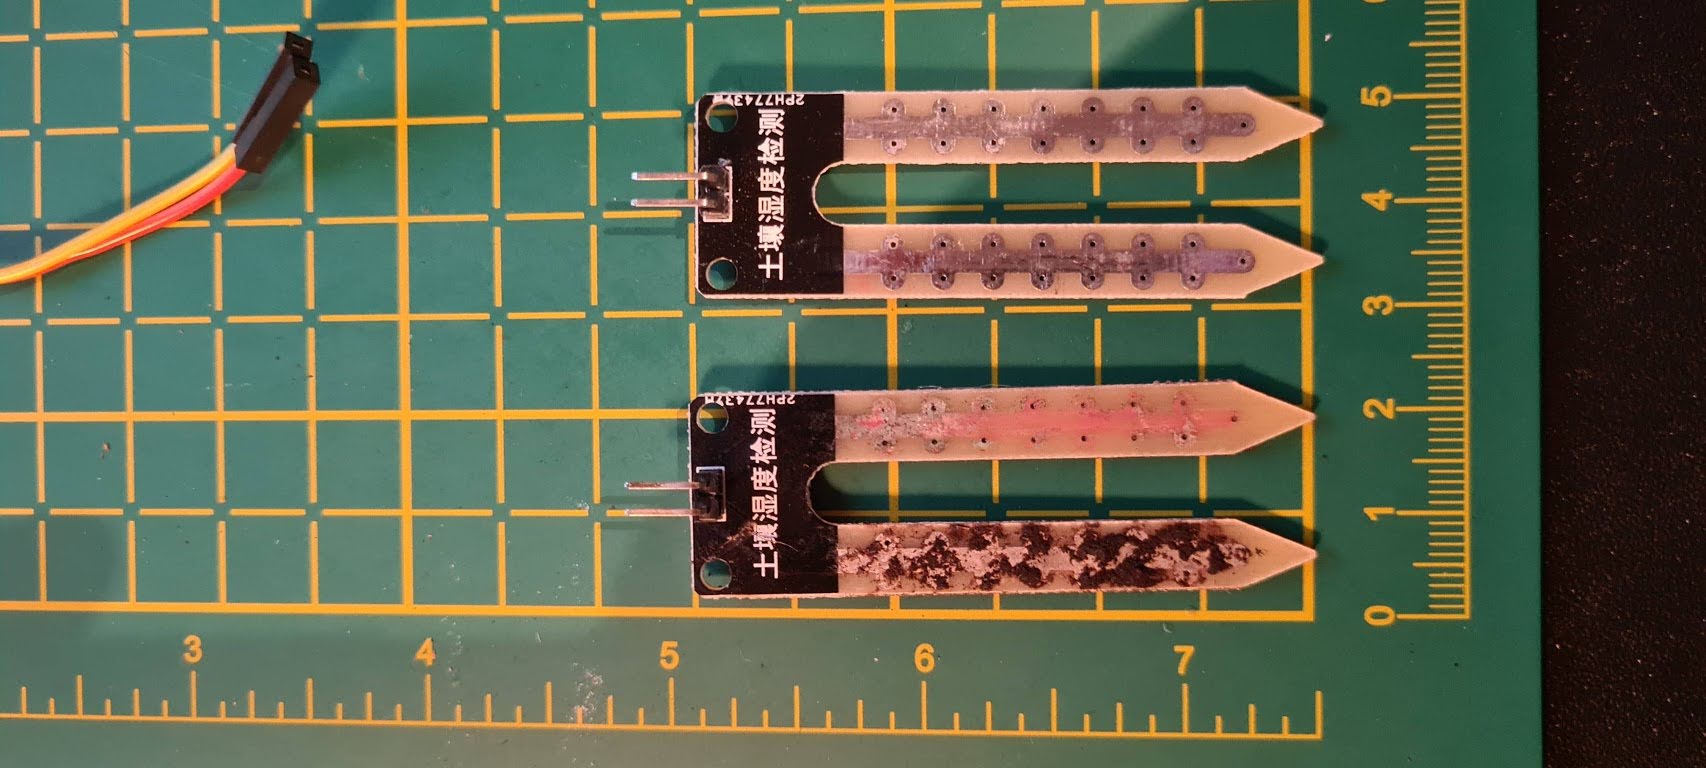 A new and used moisture sensor for comparison